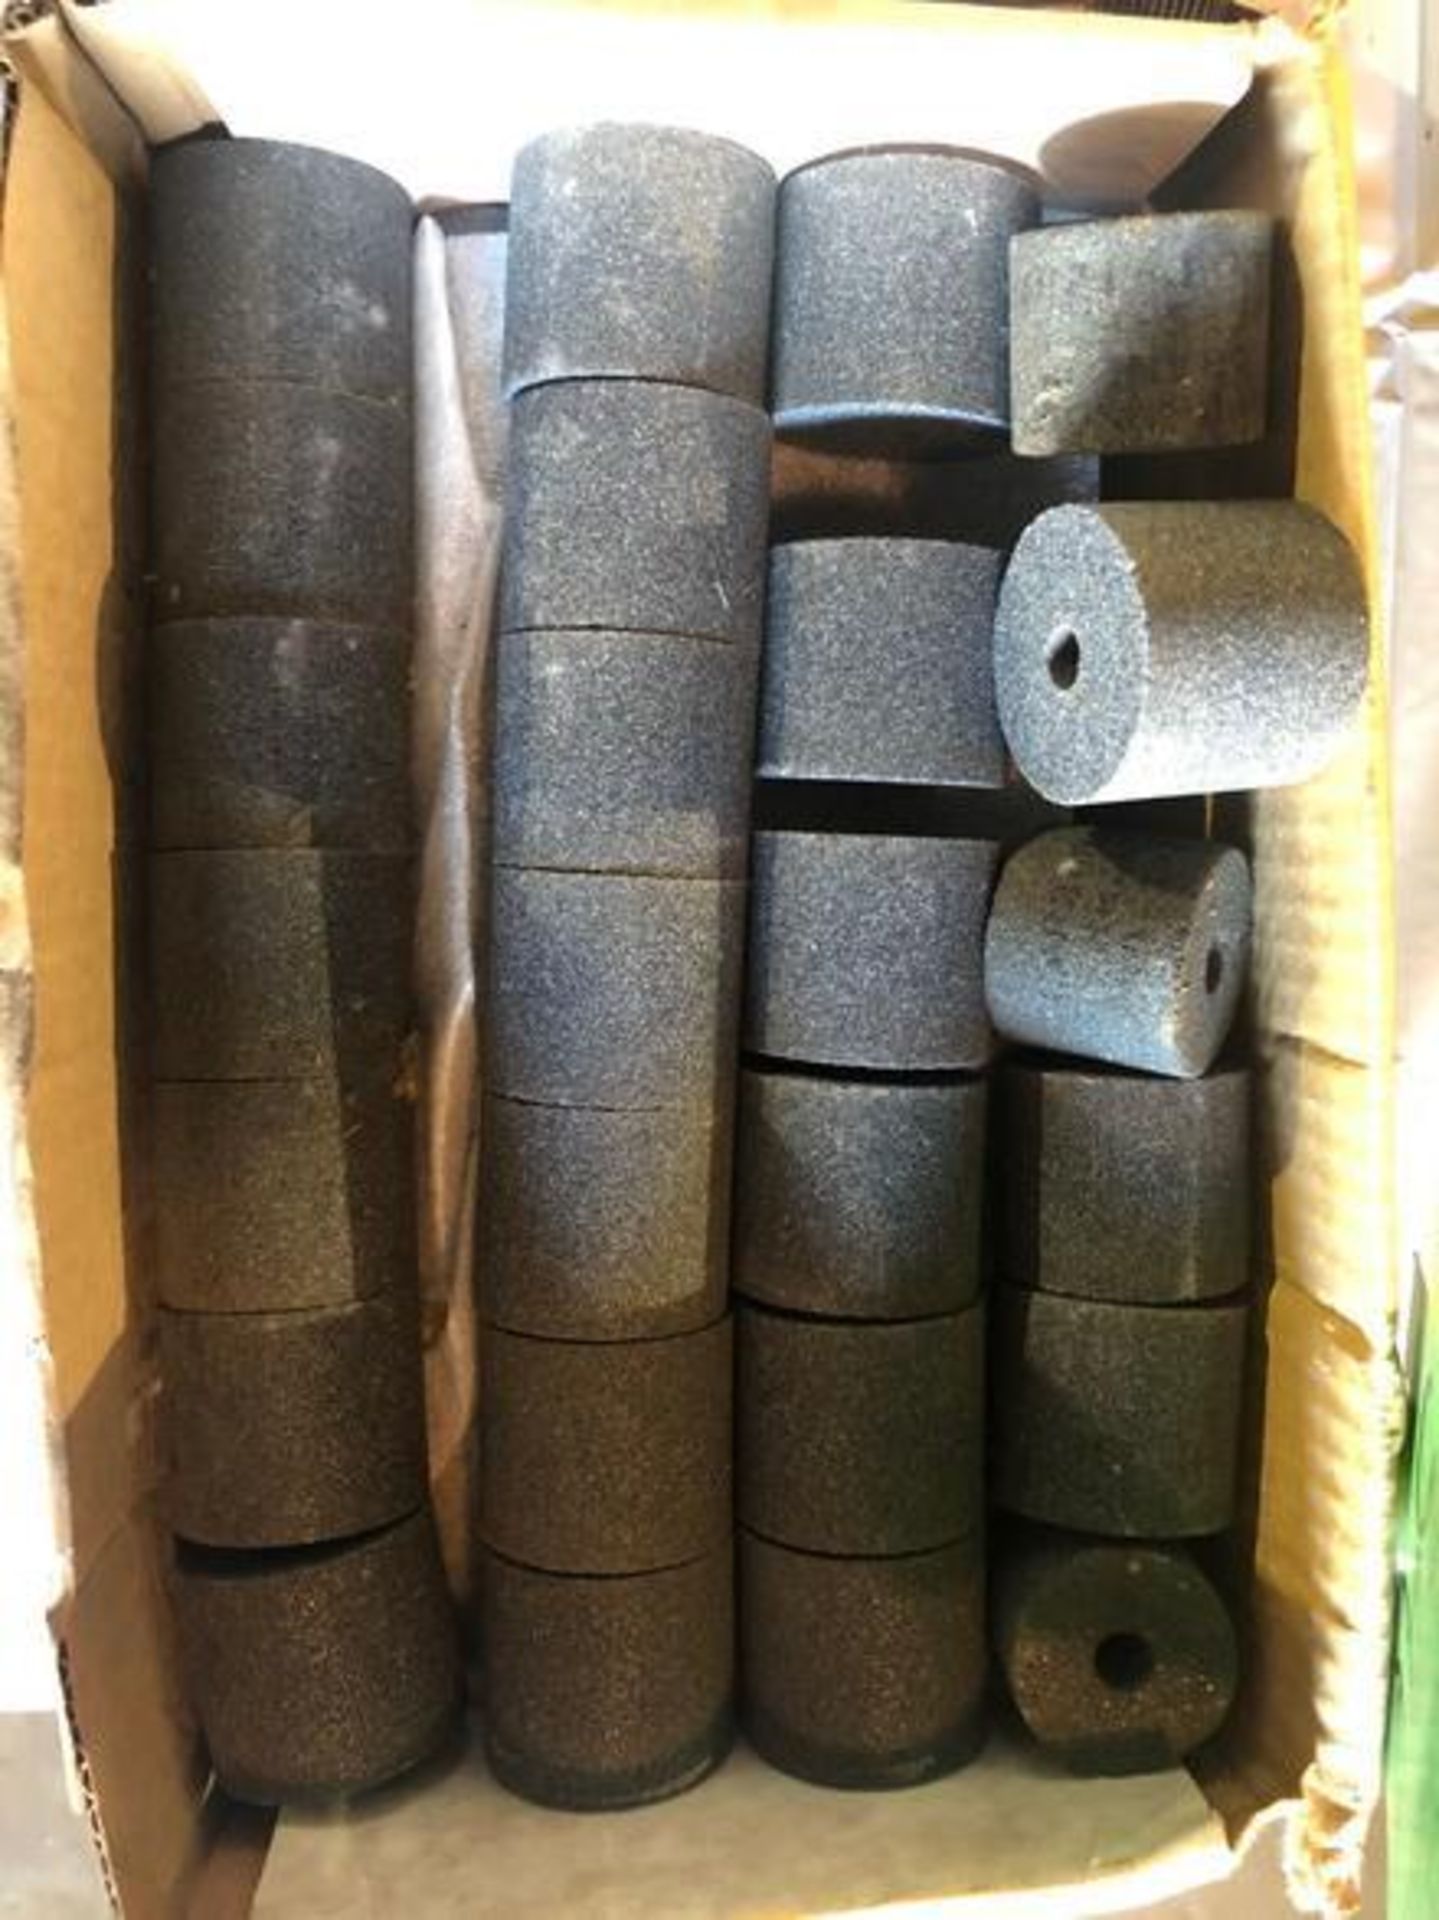 Assorted Grinding Wheels in Plastic Tote - Image 3 of 3